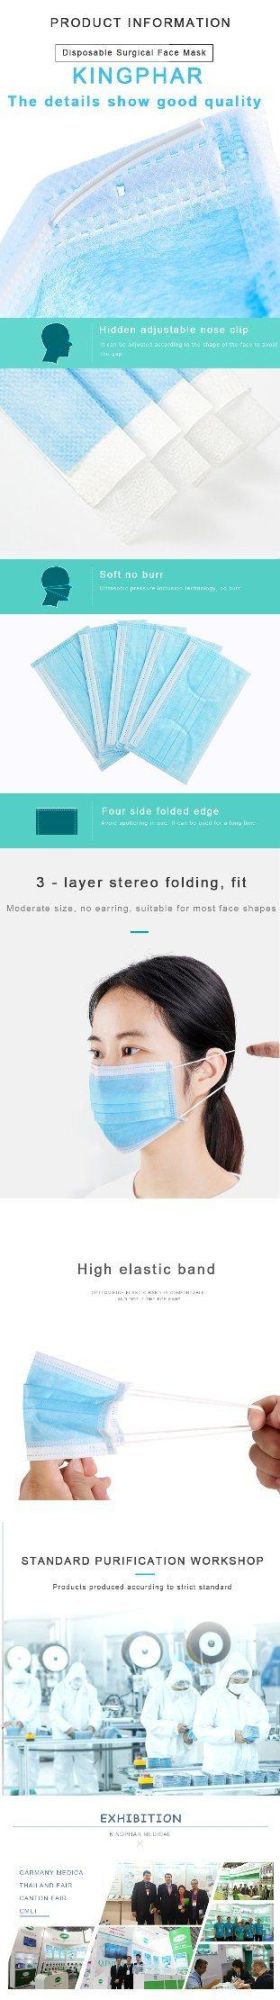 Anti Virus Anti Blood Protective Medical Mask 3ply Earloop Face Mask in Hospital Use with Ce Certified 